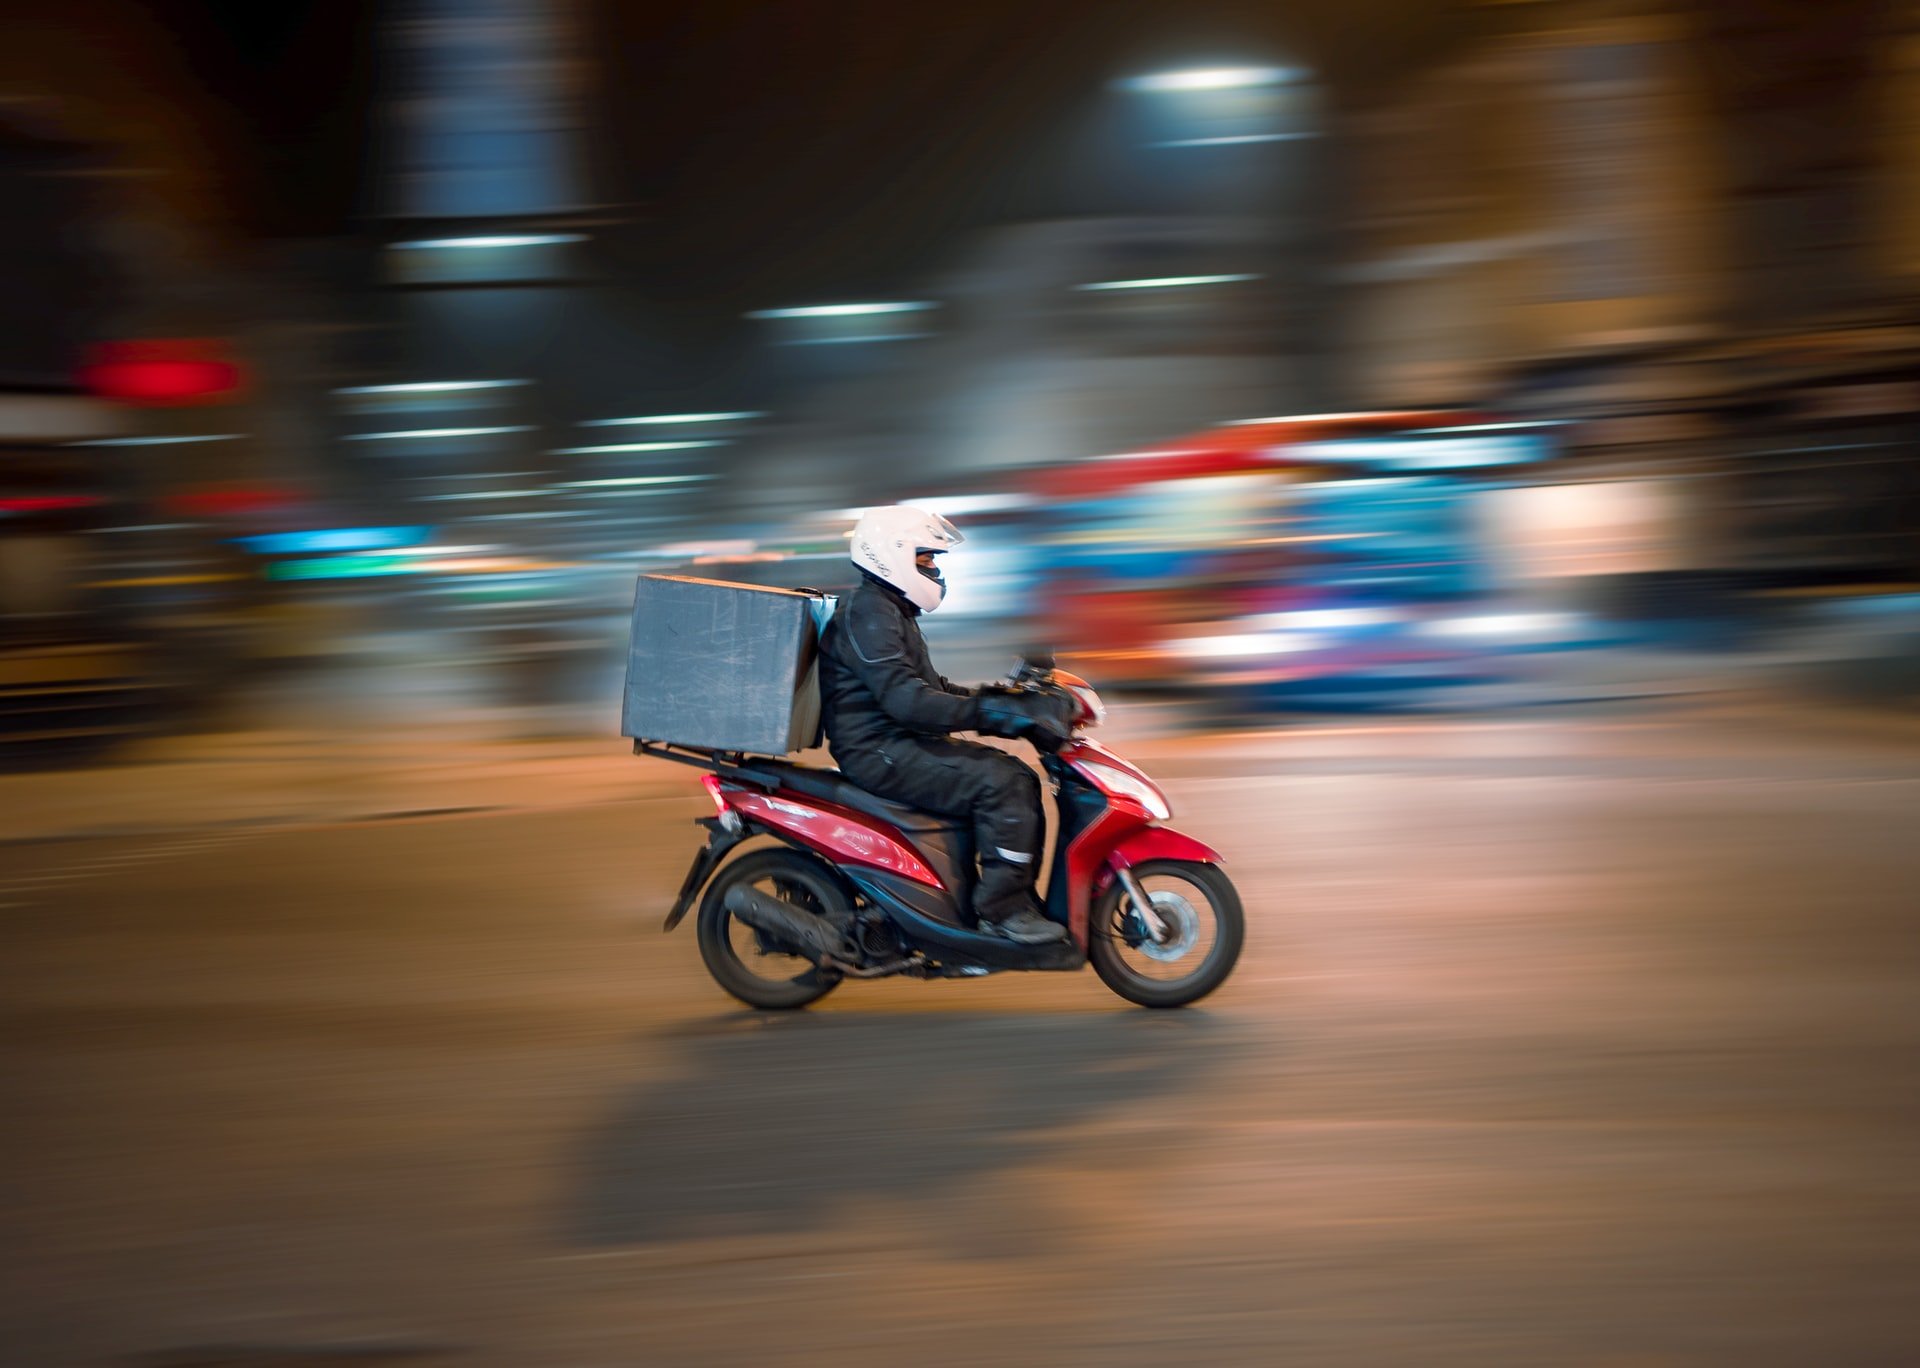 He was working as a delivery man on Christmas Eve | Source: Unsplash